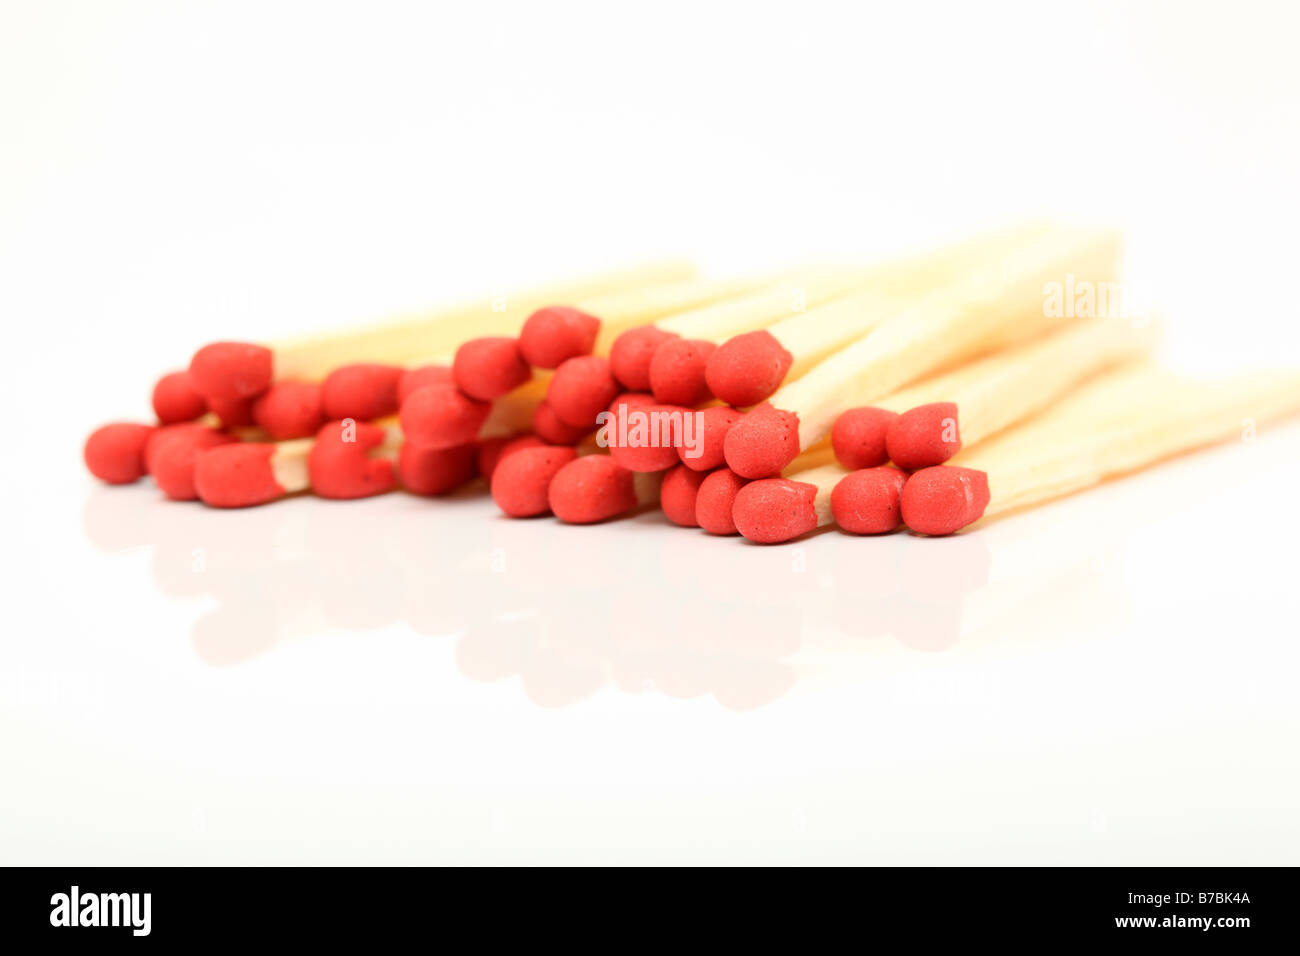 stack of wooden matches sticks closeup detail with reflection isolated Stock Photo